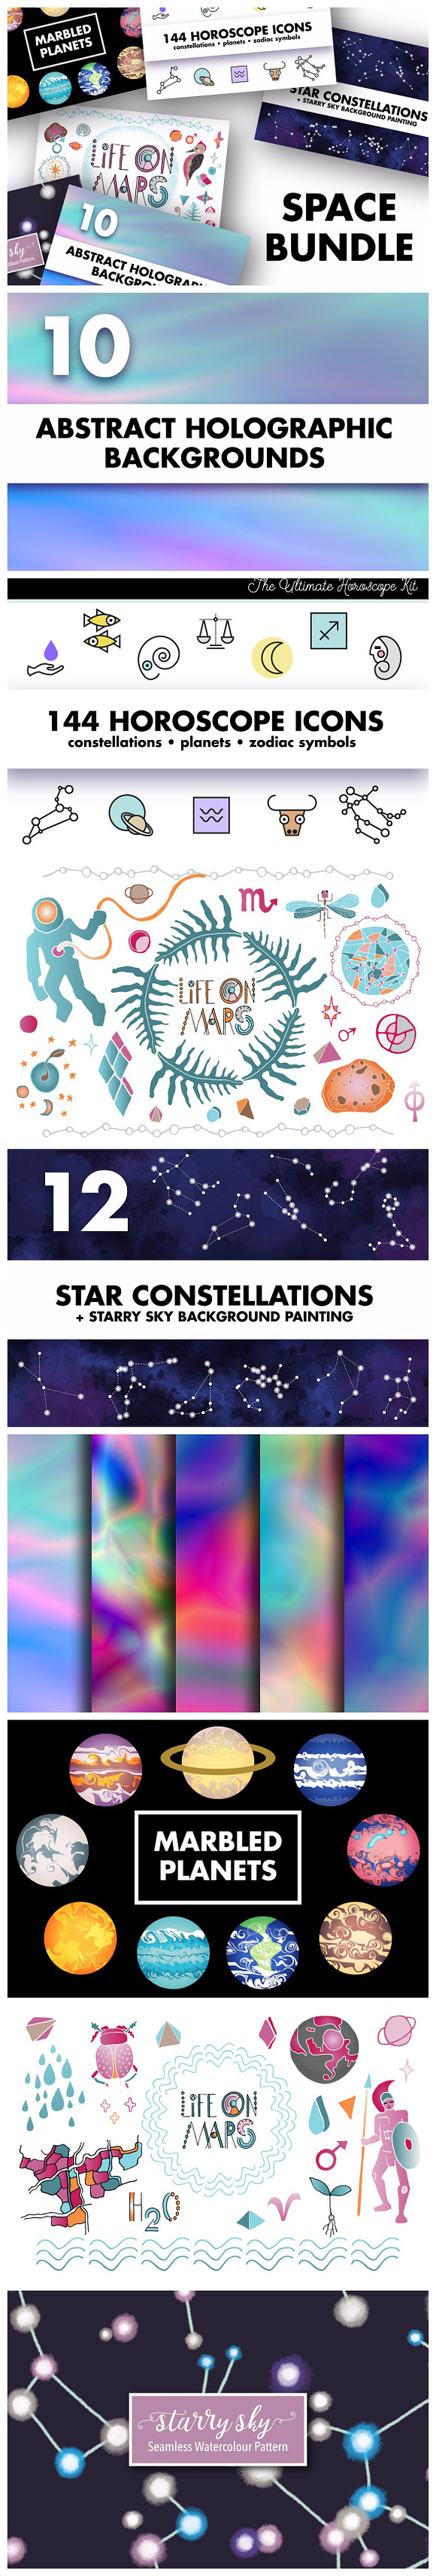 Space Bundle in Illustrations - product preview 7